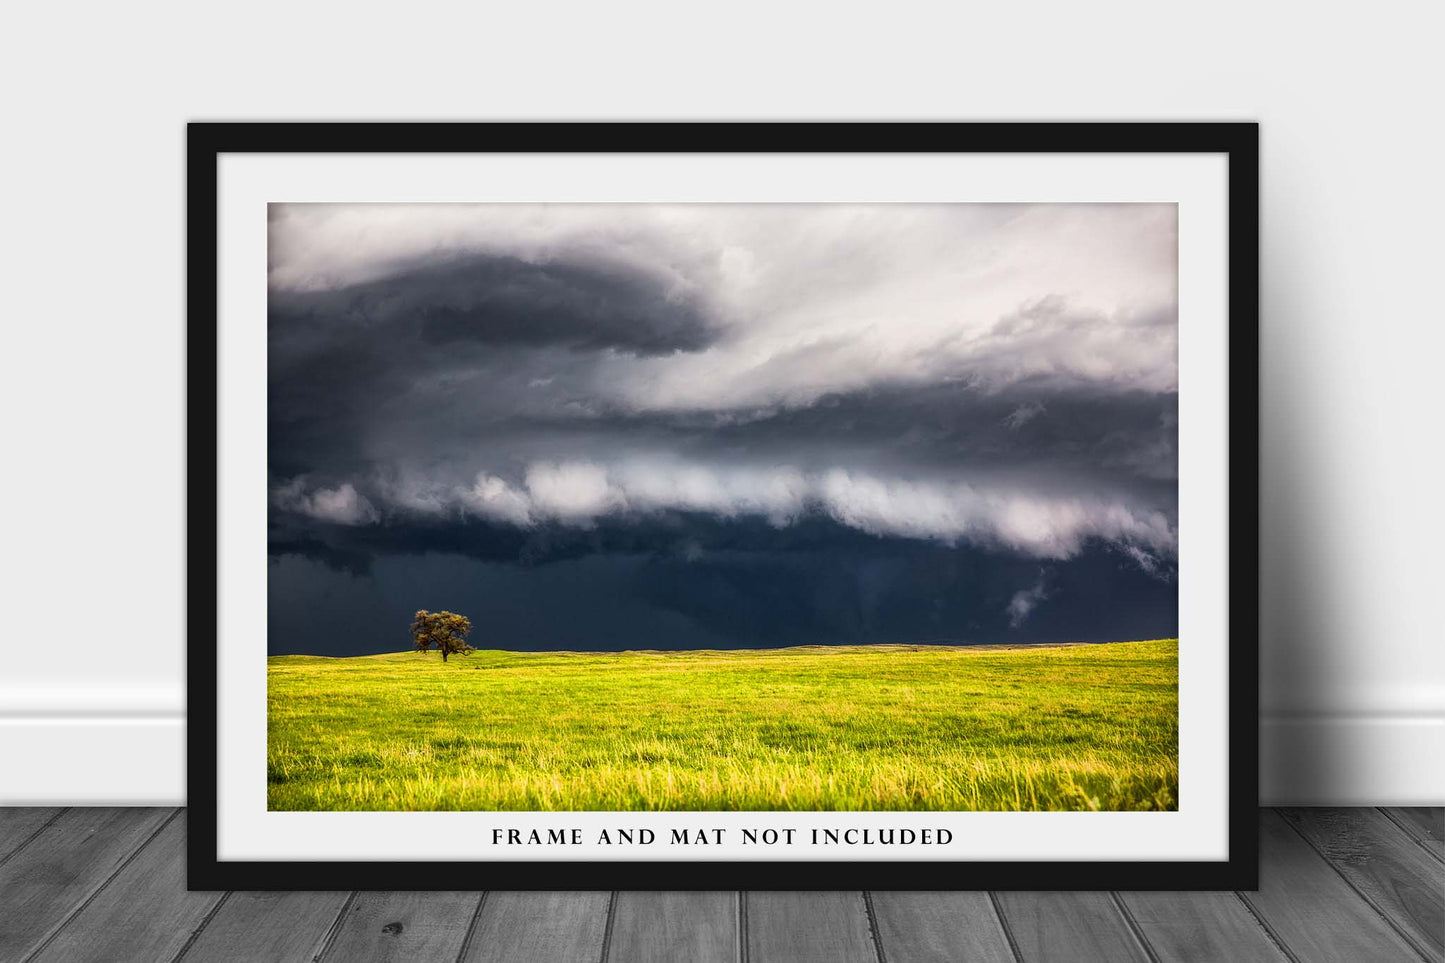 Storm Photography Print (Not Framed) Picture of Thunderstorm Passing Behind Lone Tree on Stormy Spring Day in Nebraska Prairie Wall Art Great Plains Decor